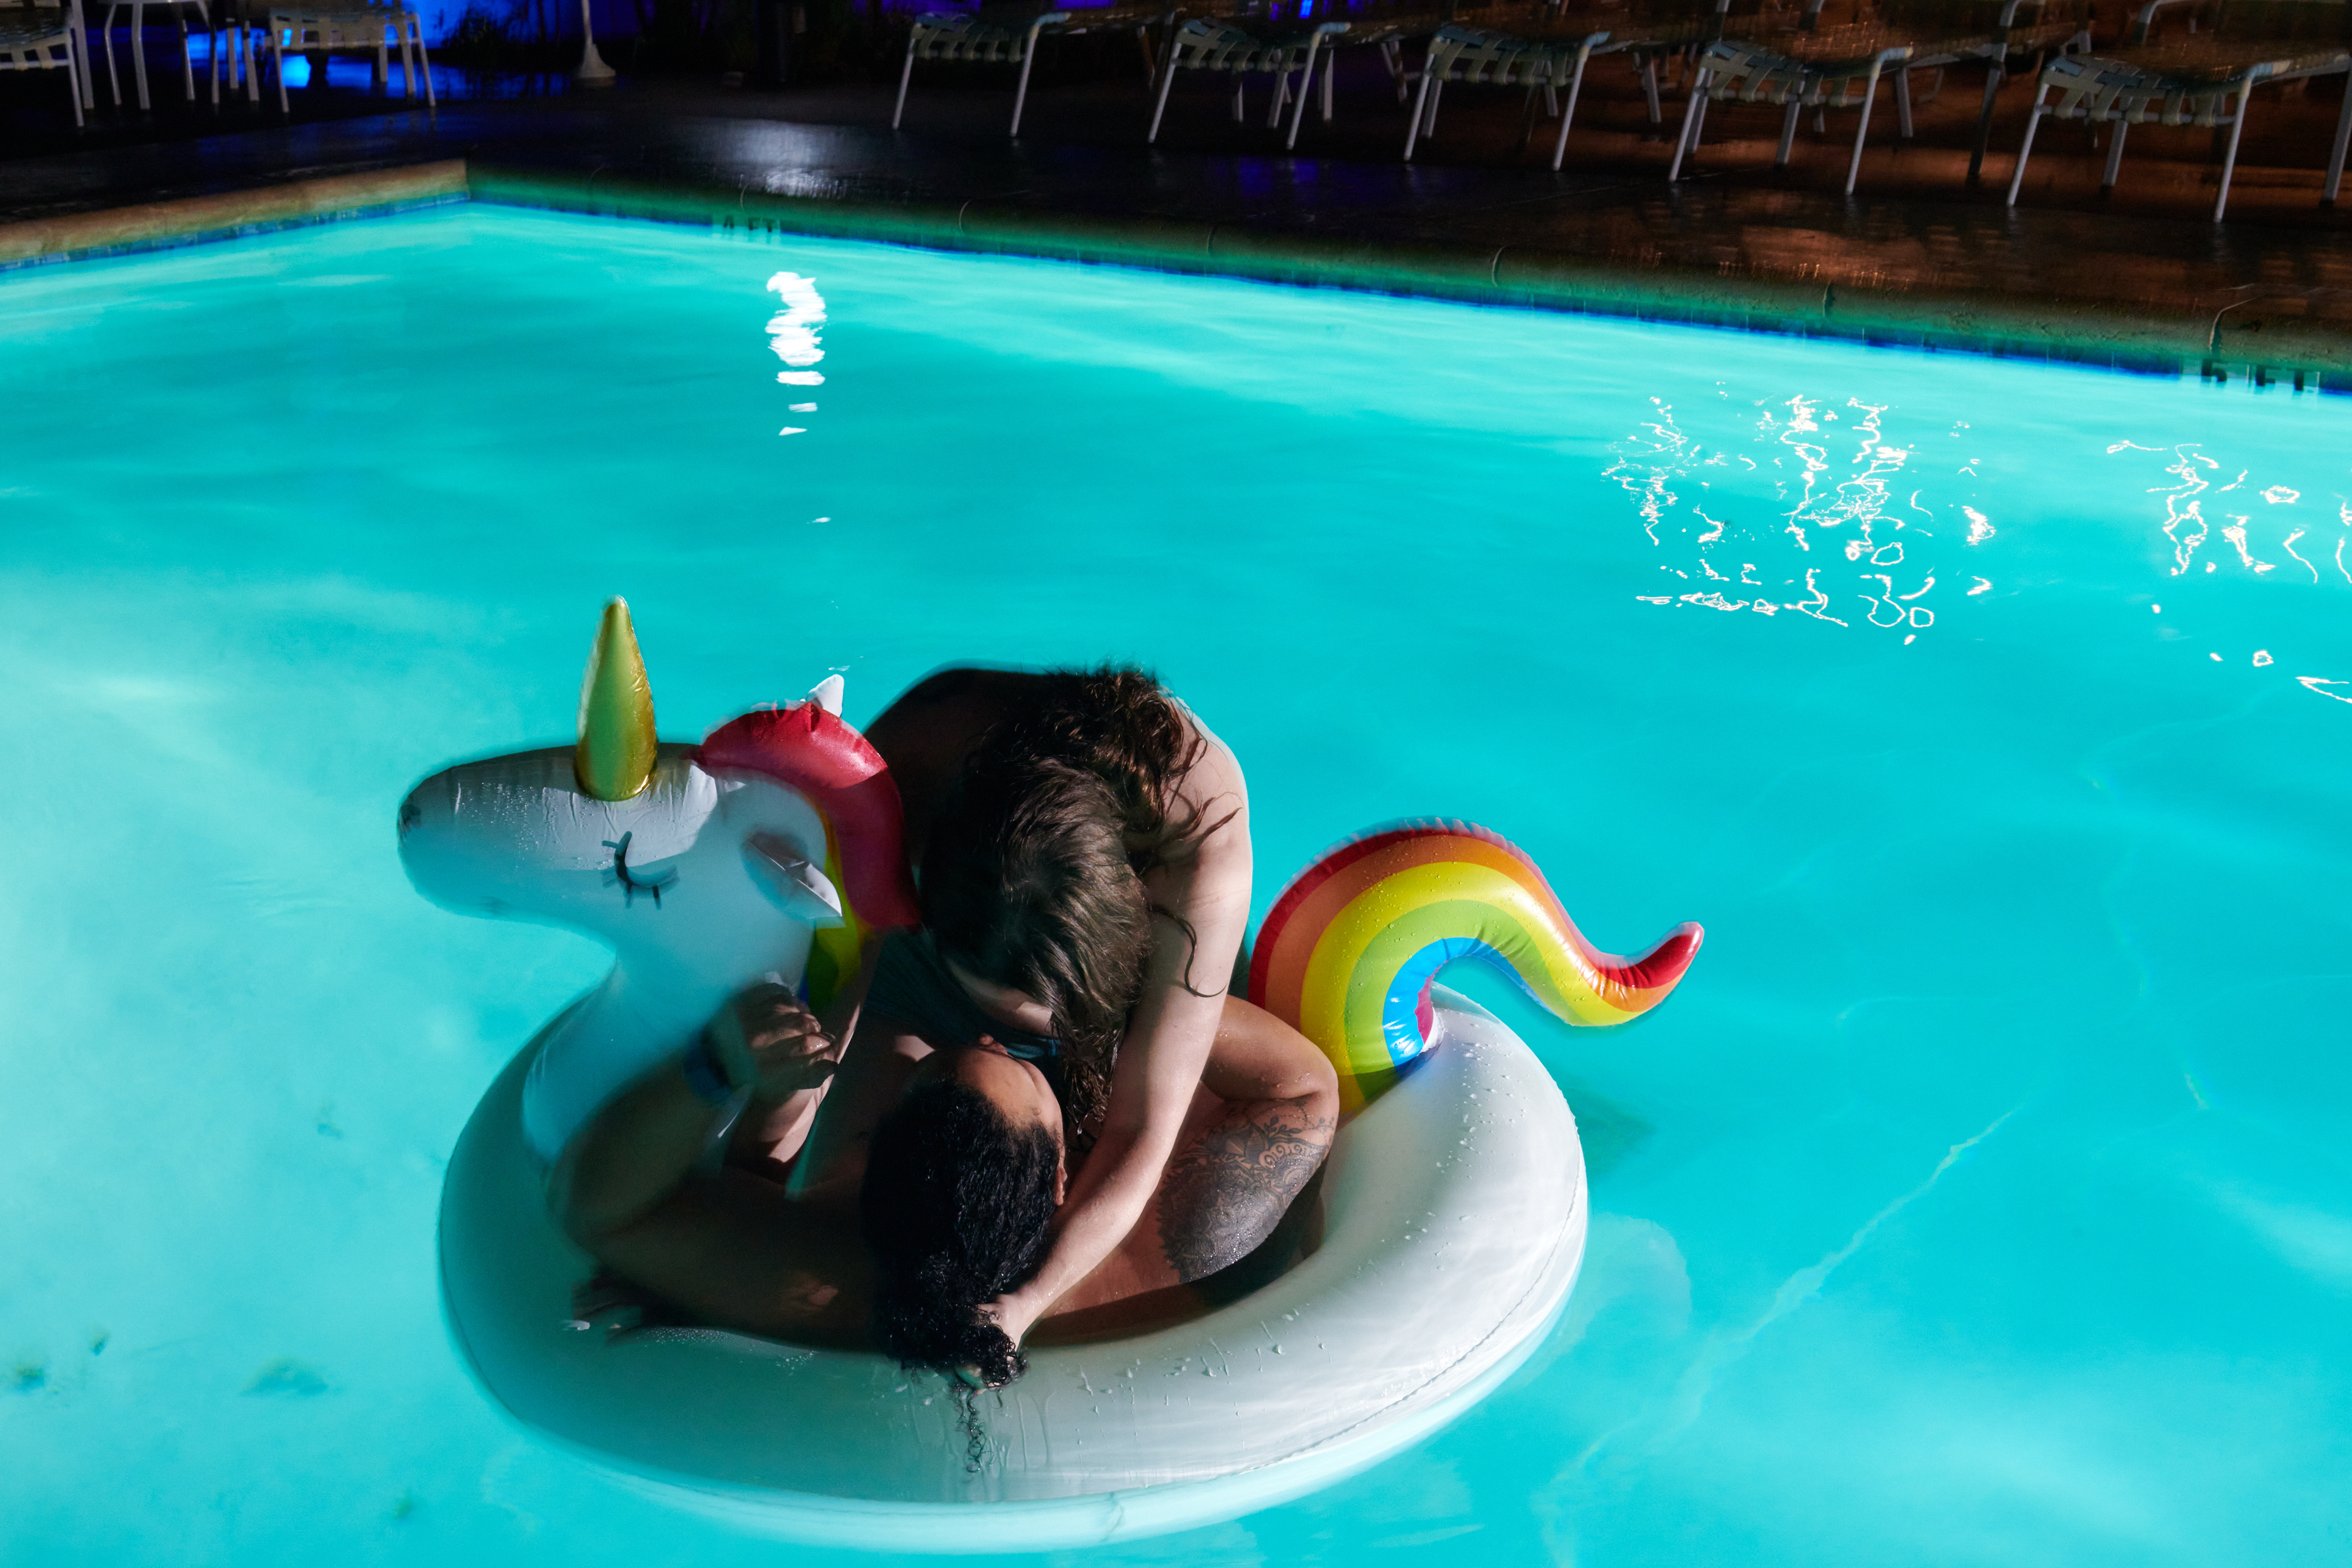 Two nude people kiss on a unicorn floaty in a pool, their faces are obscured.